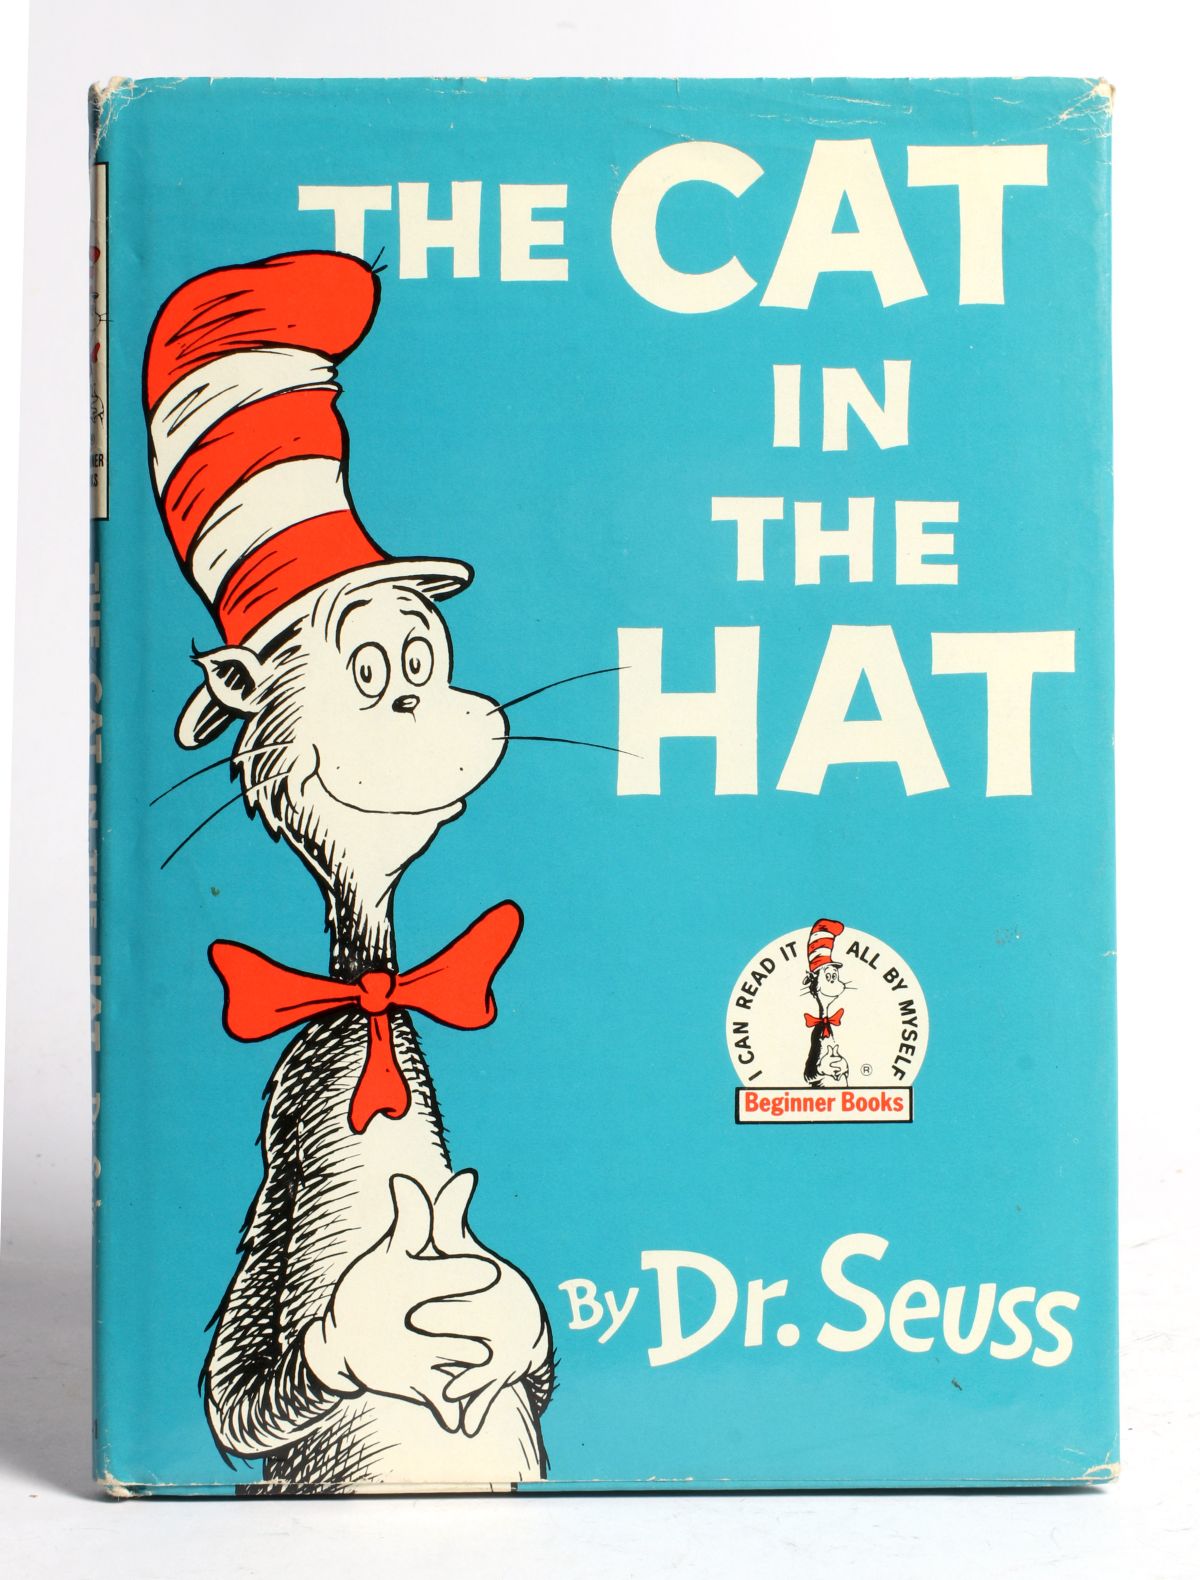 A 1957 EDITION OF CAT IN THE HAT WITH DUST JACKET